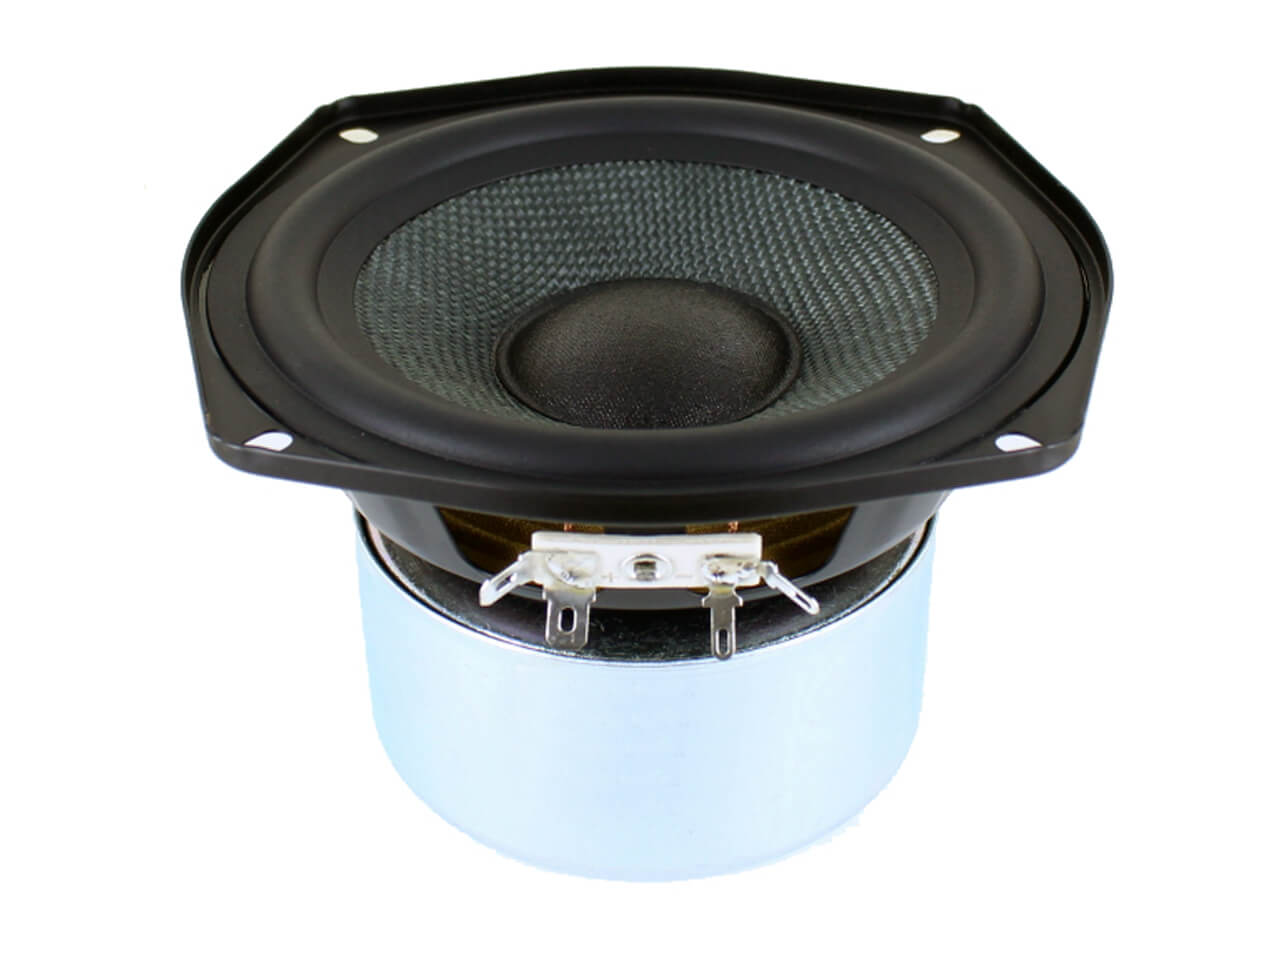 5 2 Replacement Woofer For Psb Alpha B1 Made With Kevlar Cone W